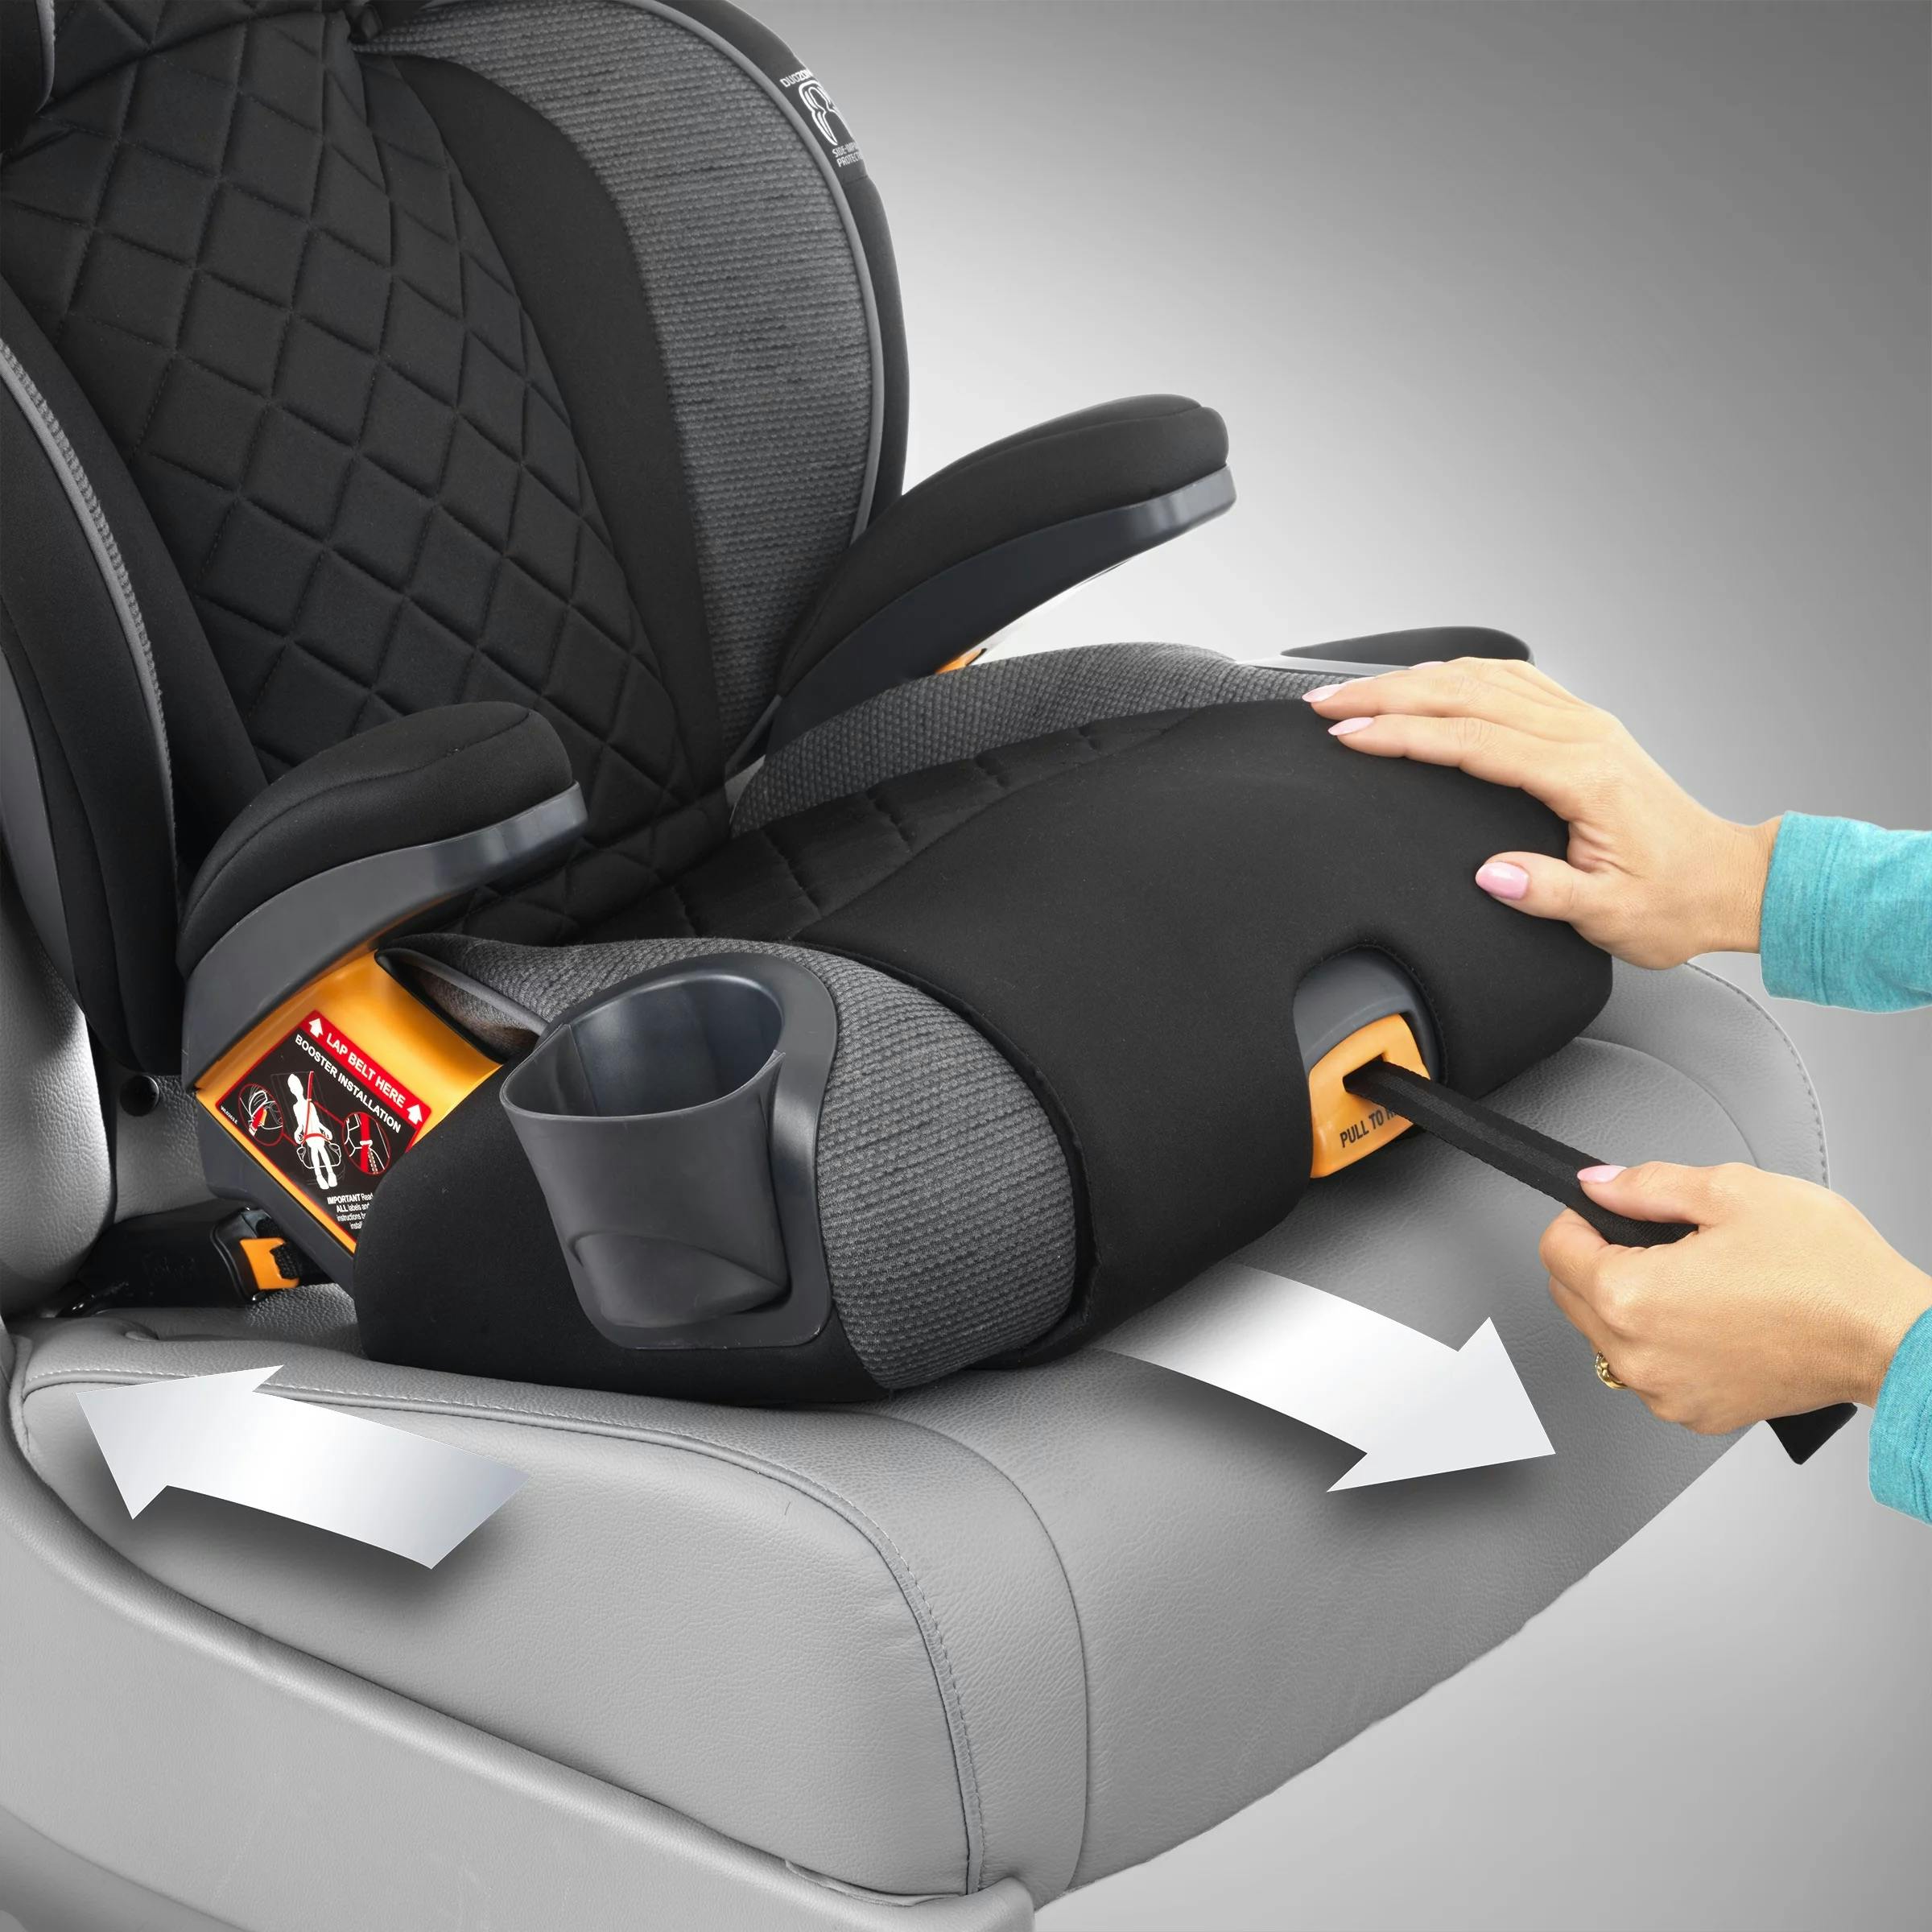 Chicco kidfit booster seat as part of the 2023 recall